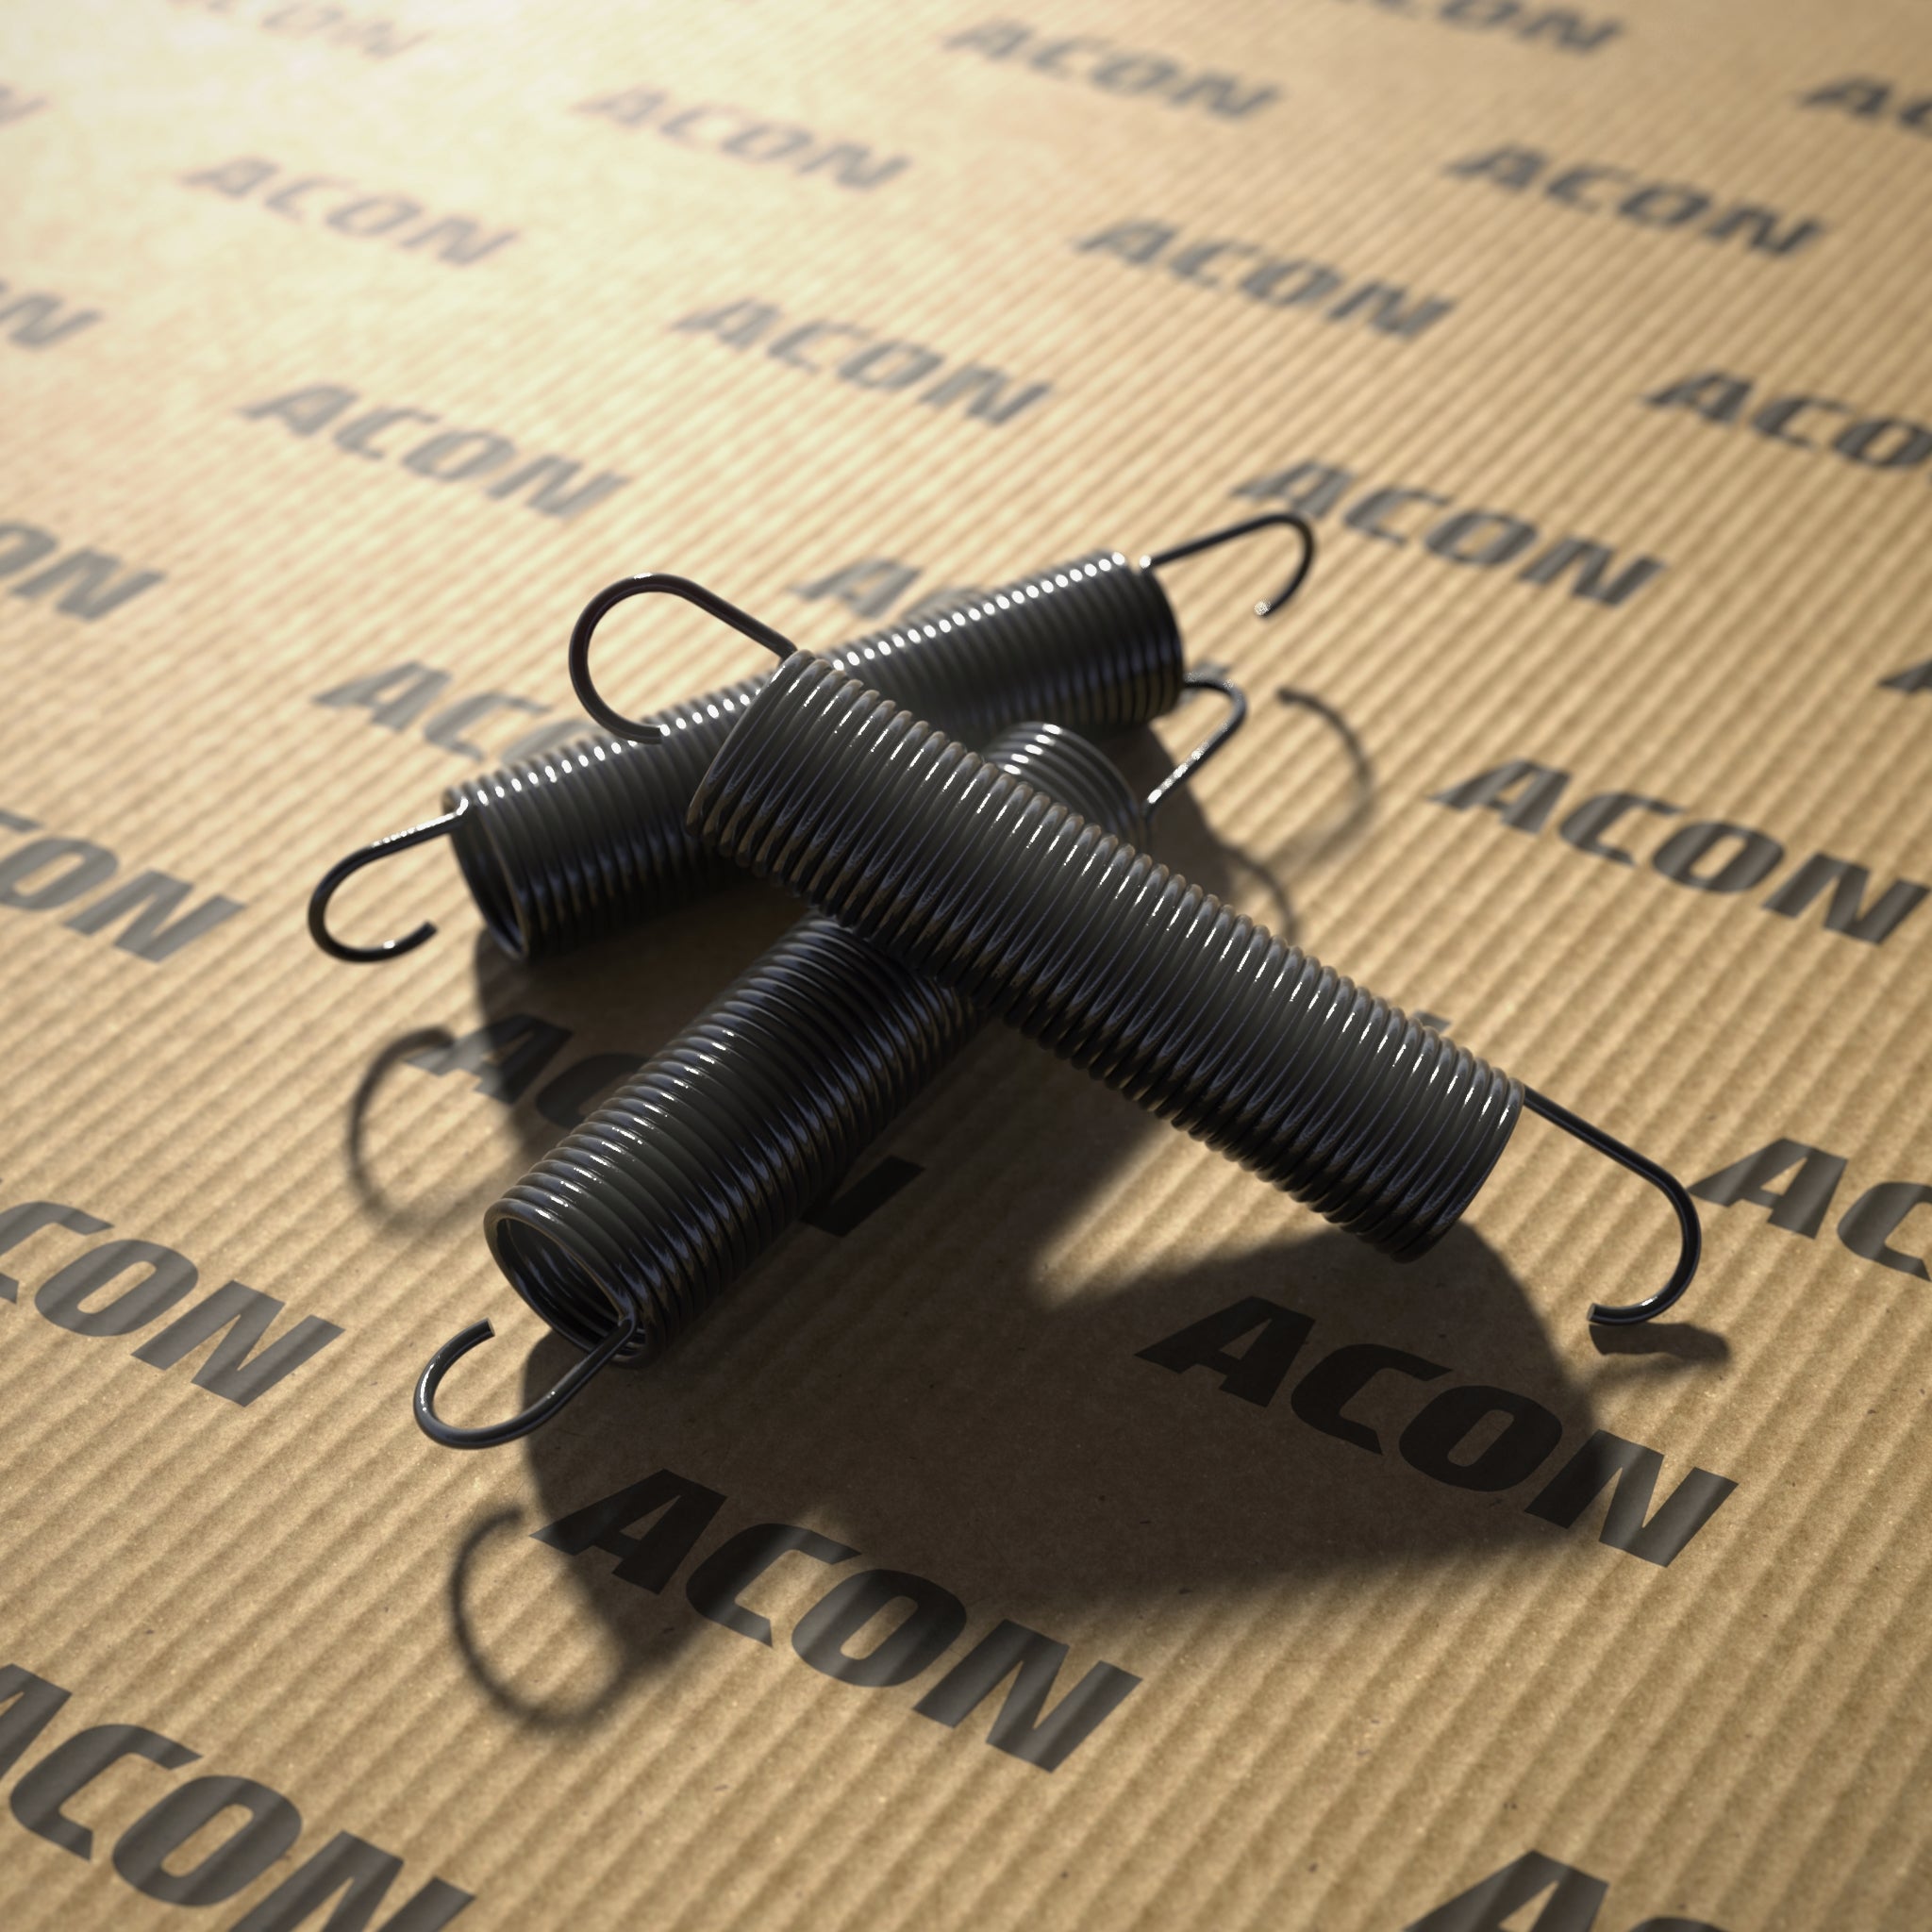 An image of ACON performance springs against cardboard box branded with ACON logos